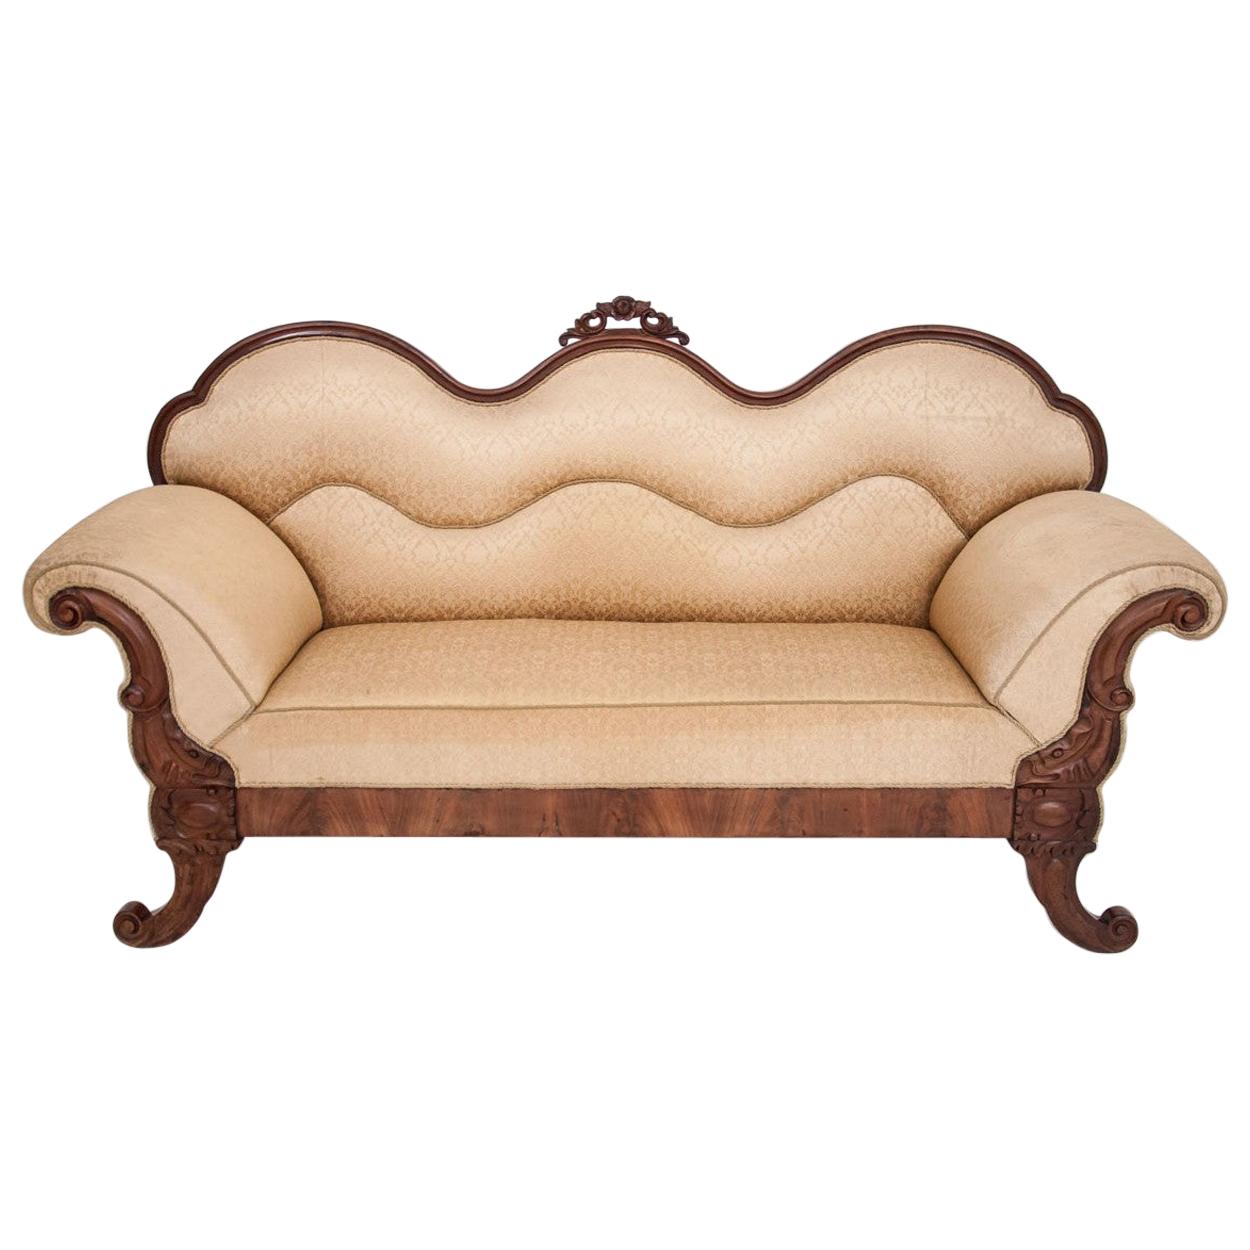 Antique Sofa from circa 1890 For Sale at 1stDibs